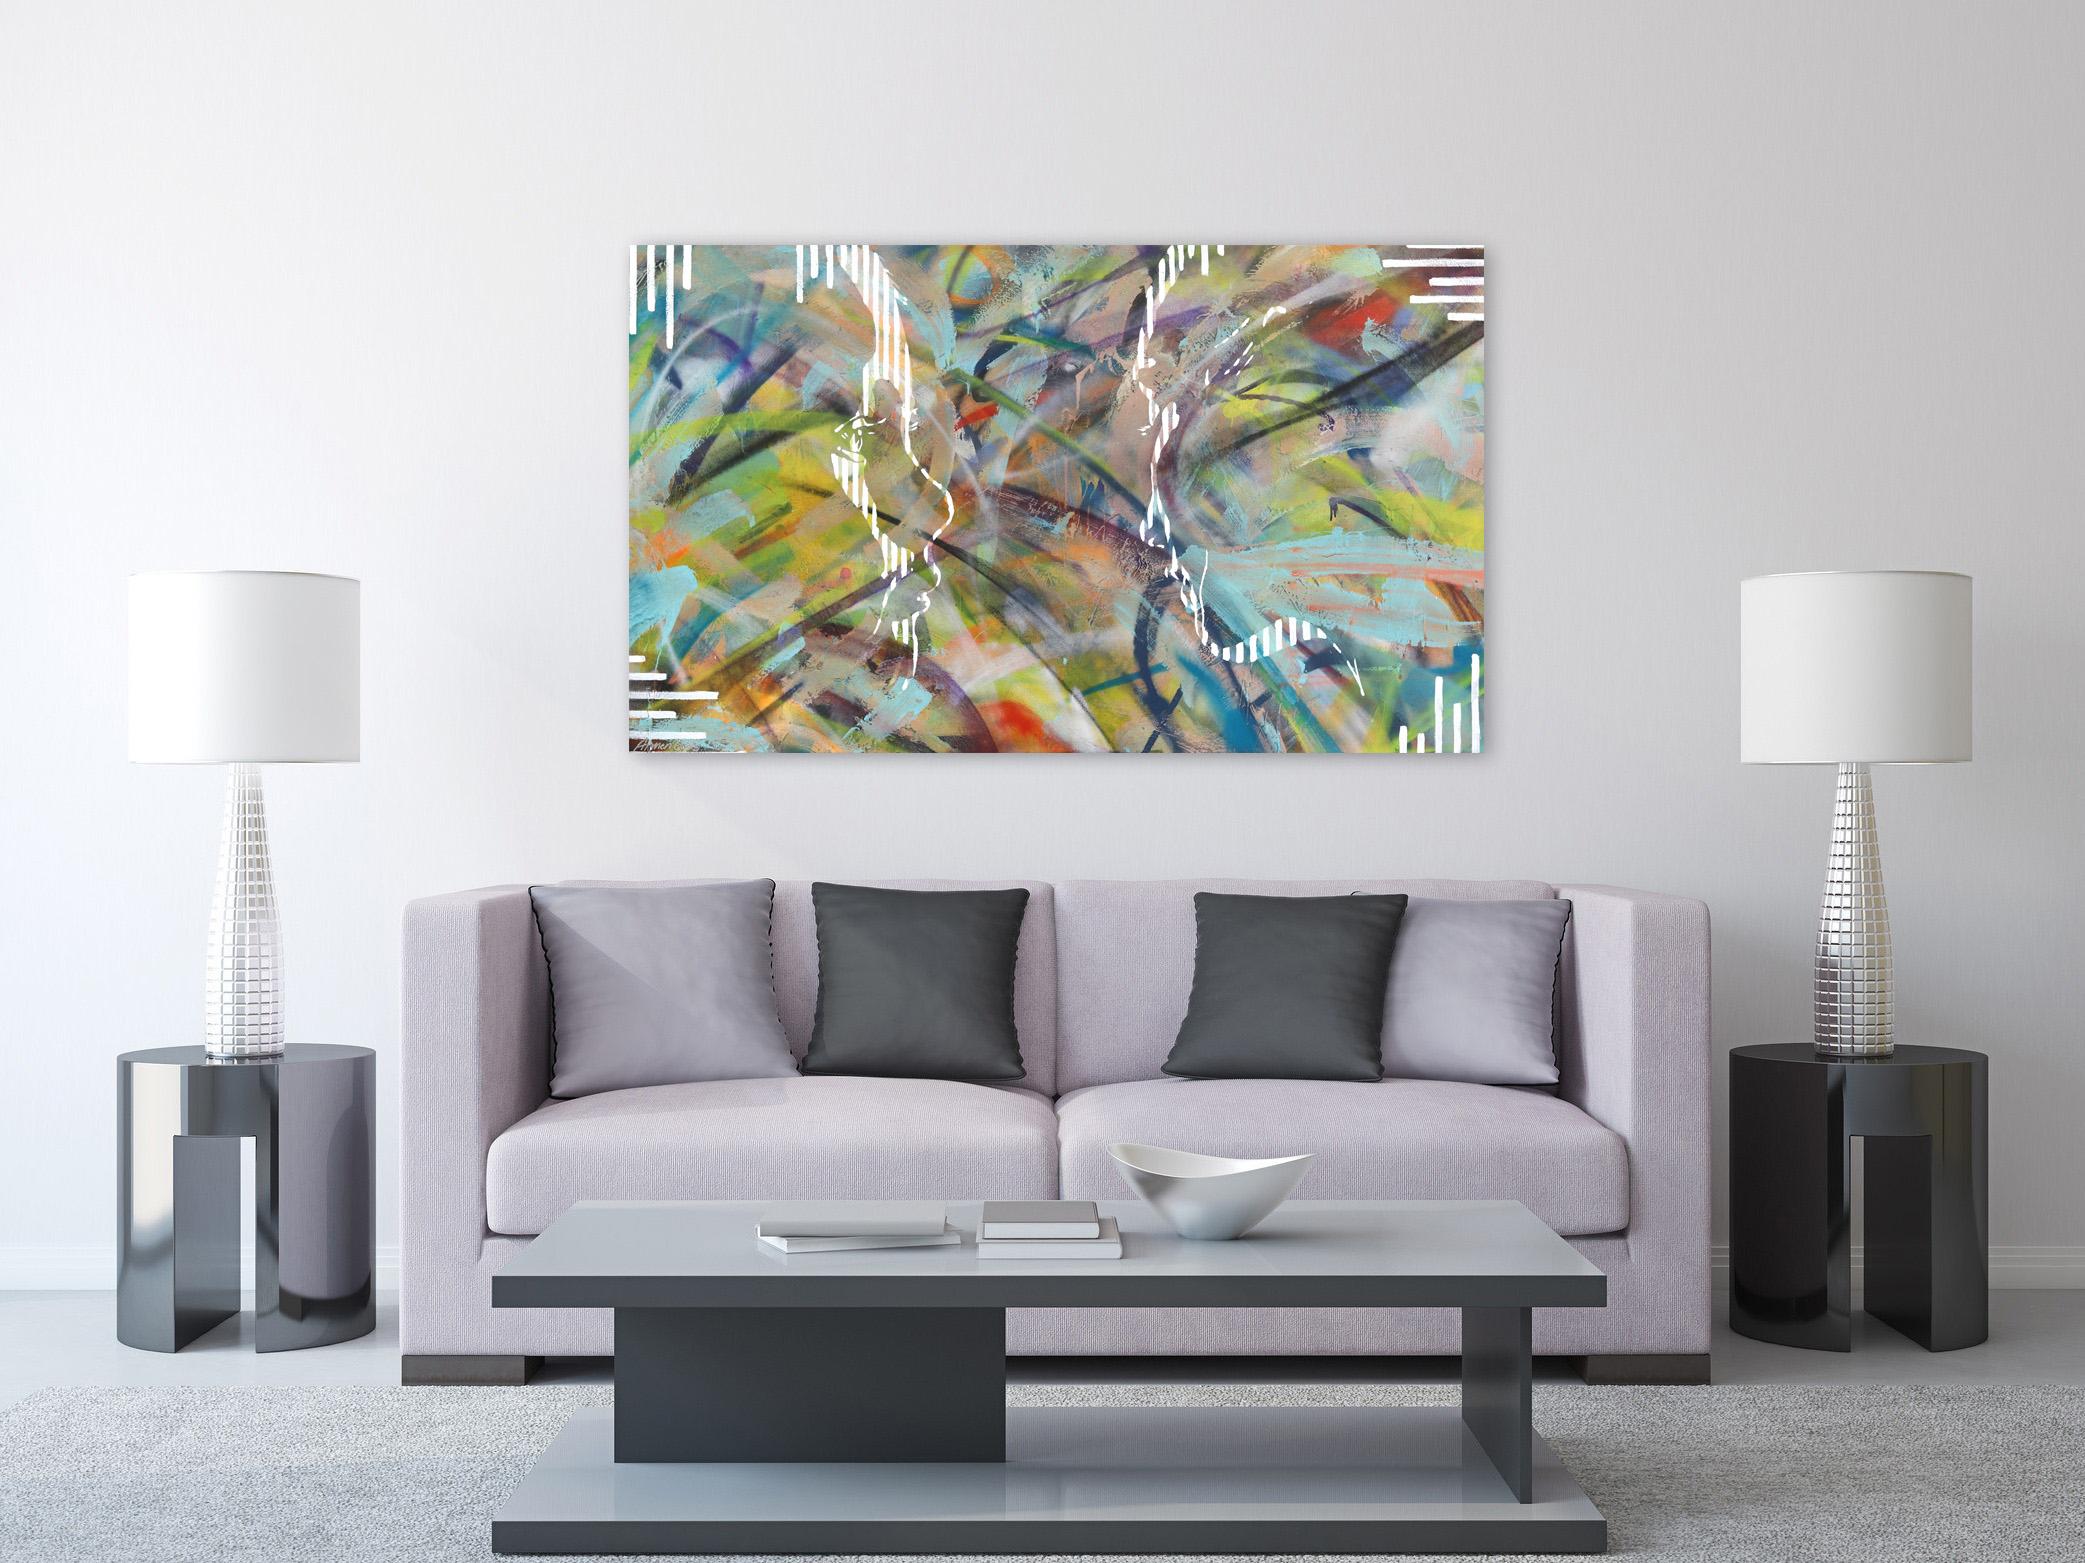 Large Abstract Figurative Painting For Sale - Where Are You Now - Contemporary Mixed Media Art by Armen Ges